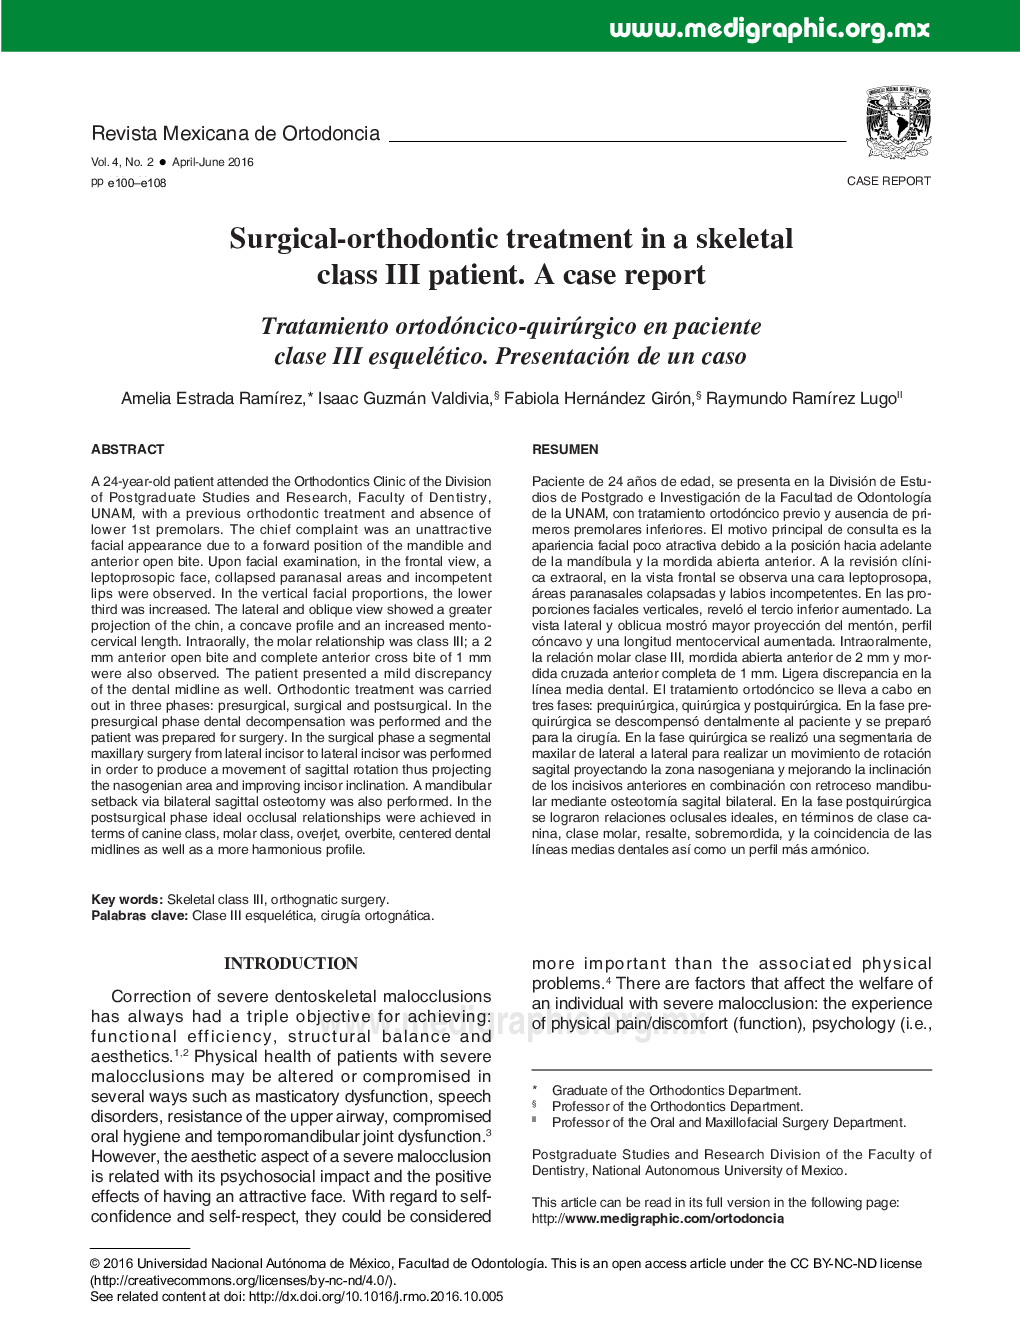 Surgical-orthodontic treatment in a skeletal class III patient. A case report